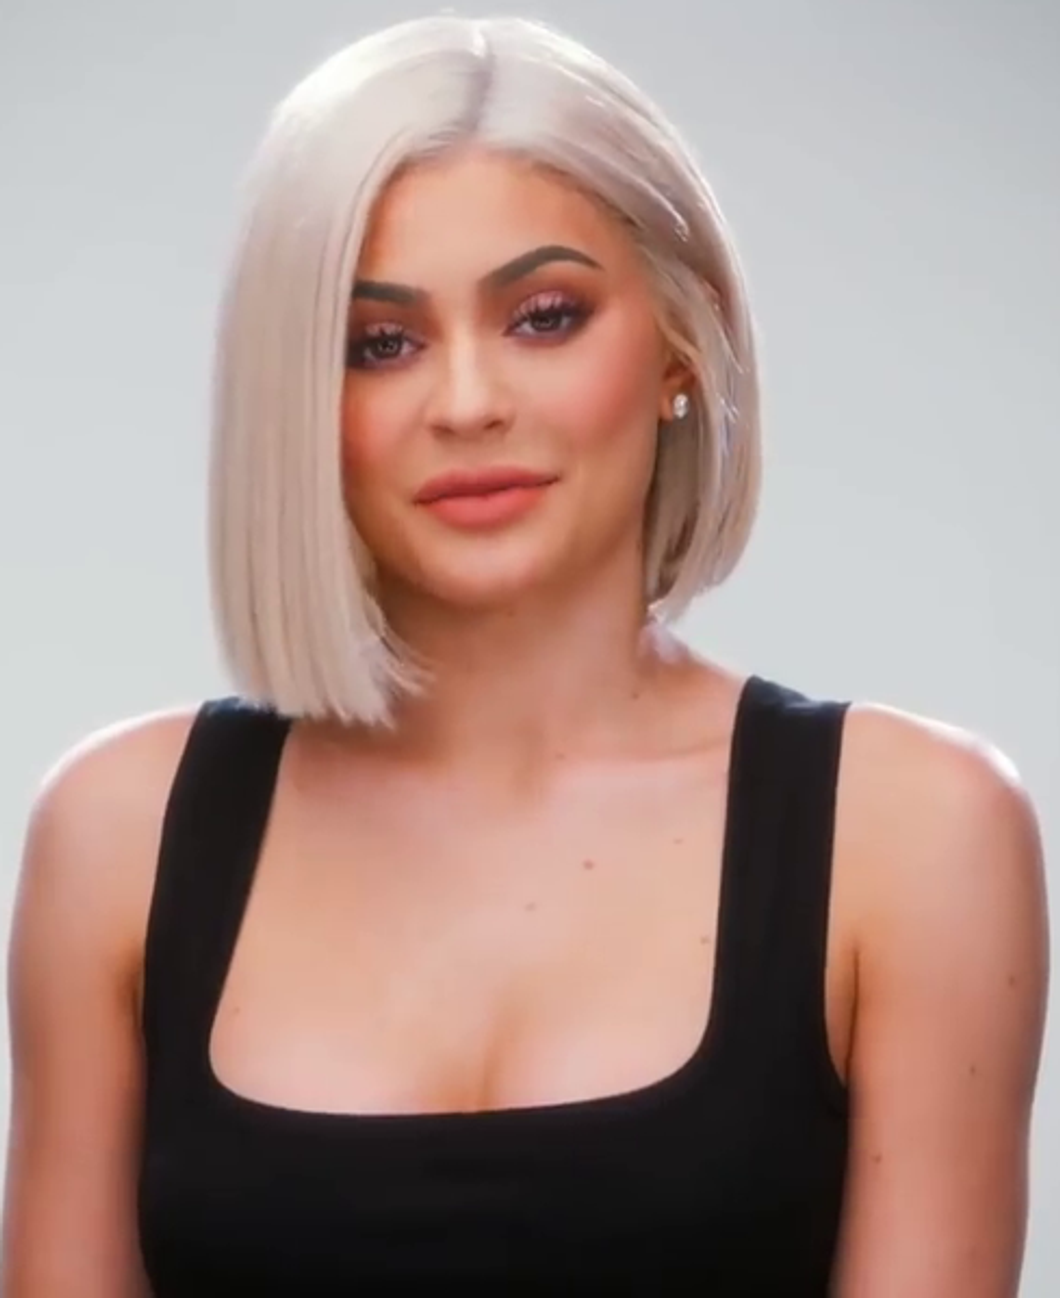 https://upload.wikimedia.org/wikipedia/commons/thumb/4/43/Kylie_Jenner2_%28cropped%29.png/489px-Kylie_Jenner2_%28cropped%29.png